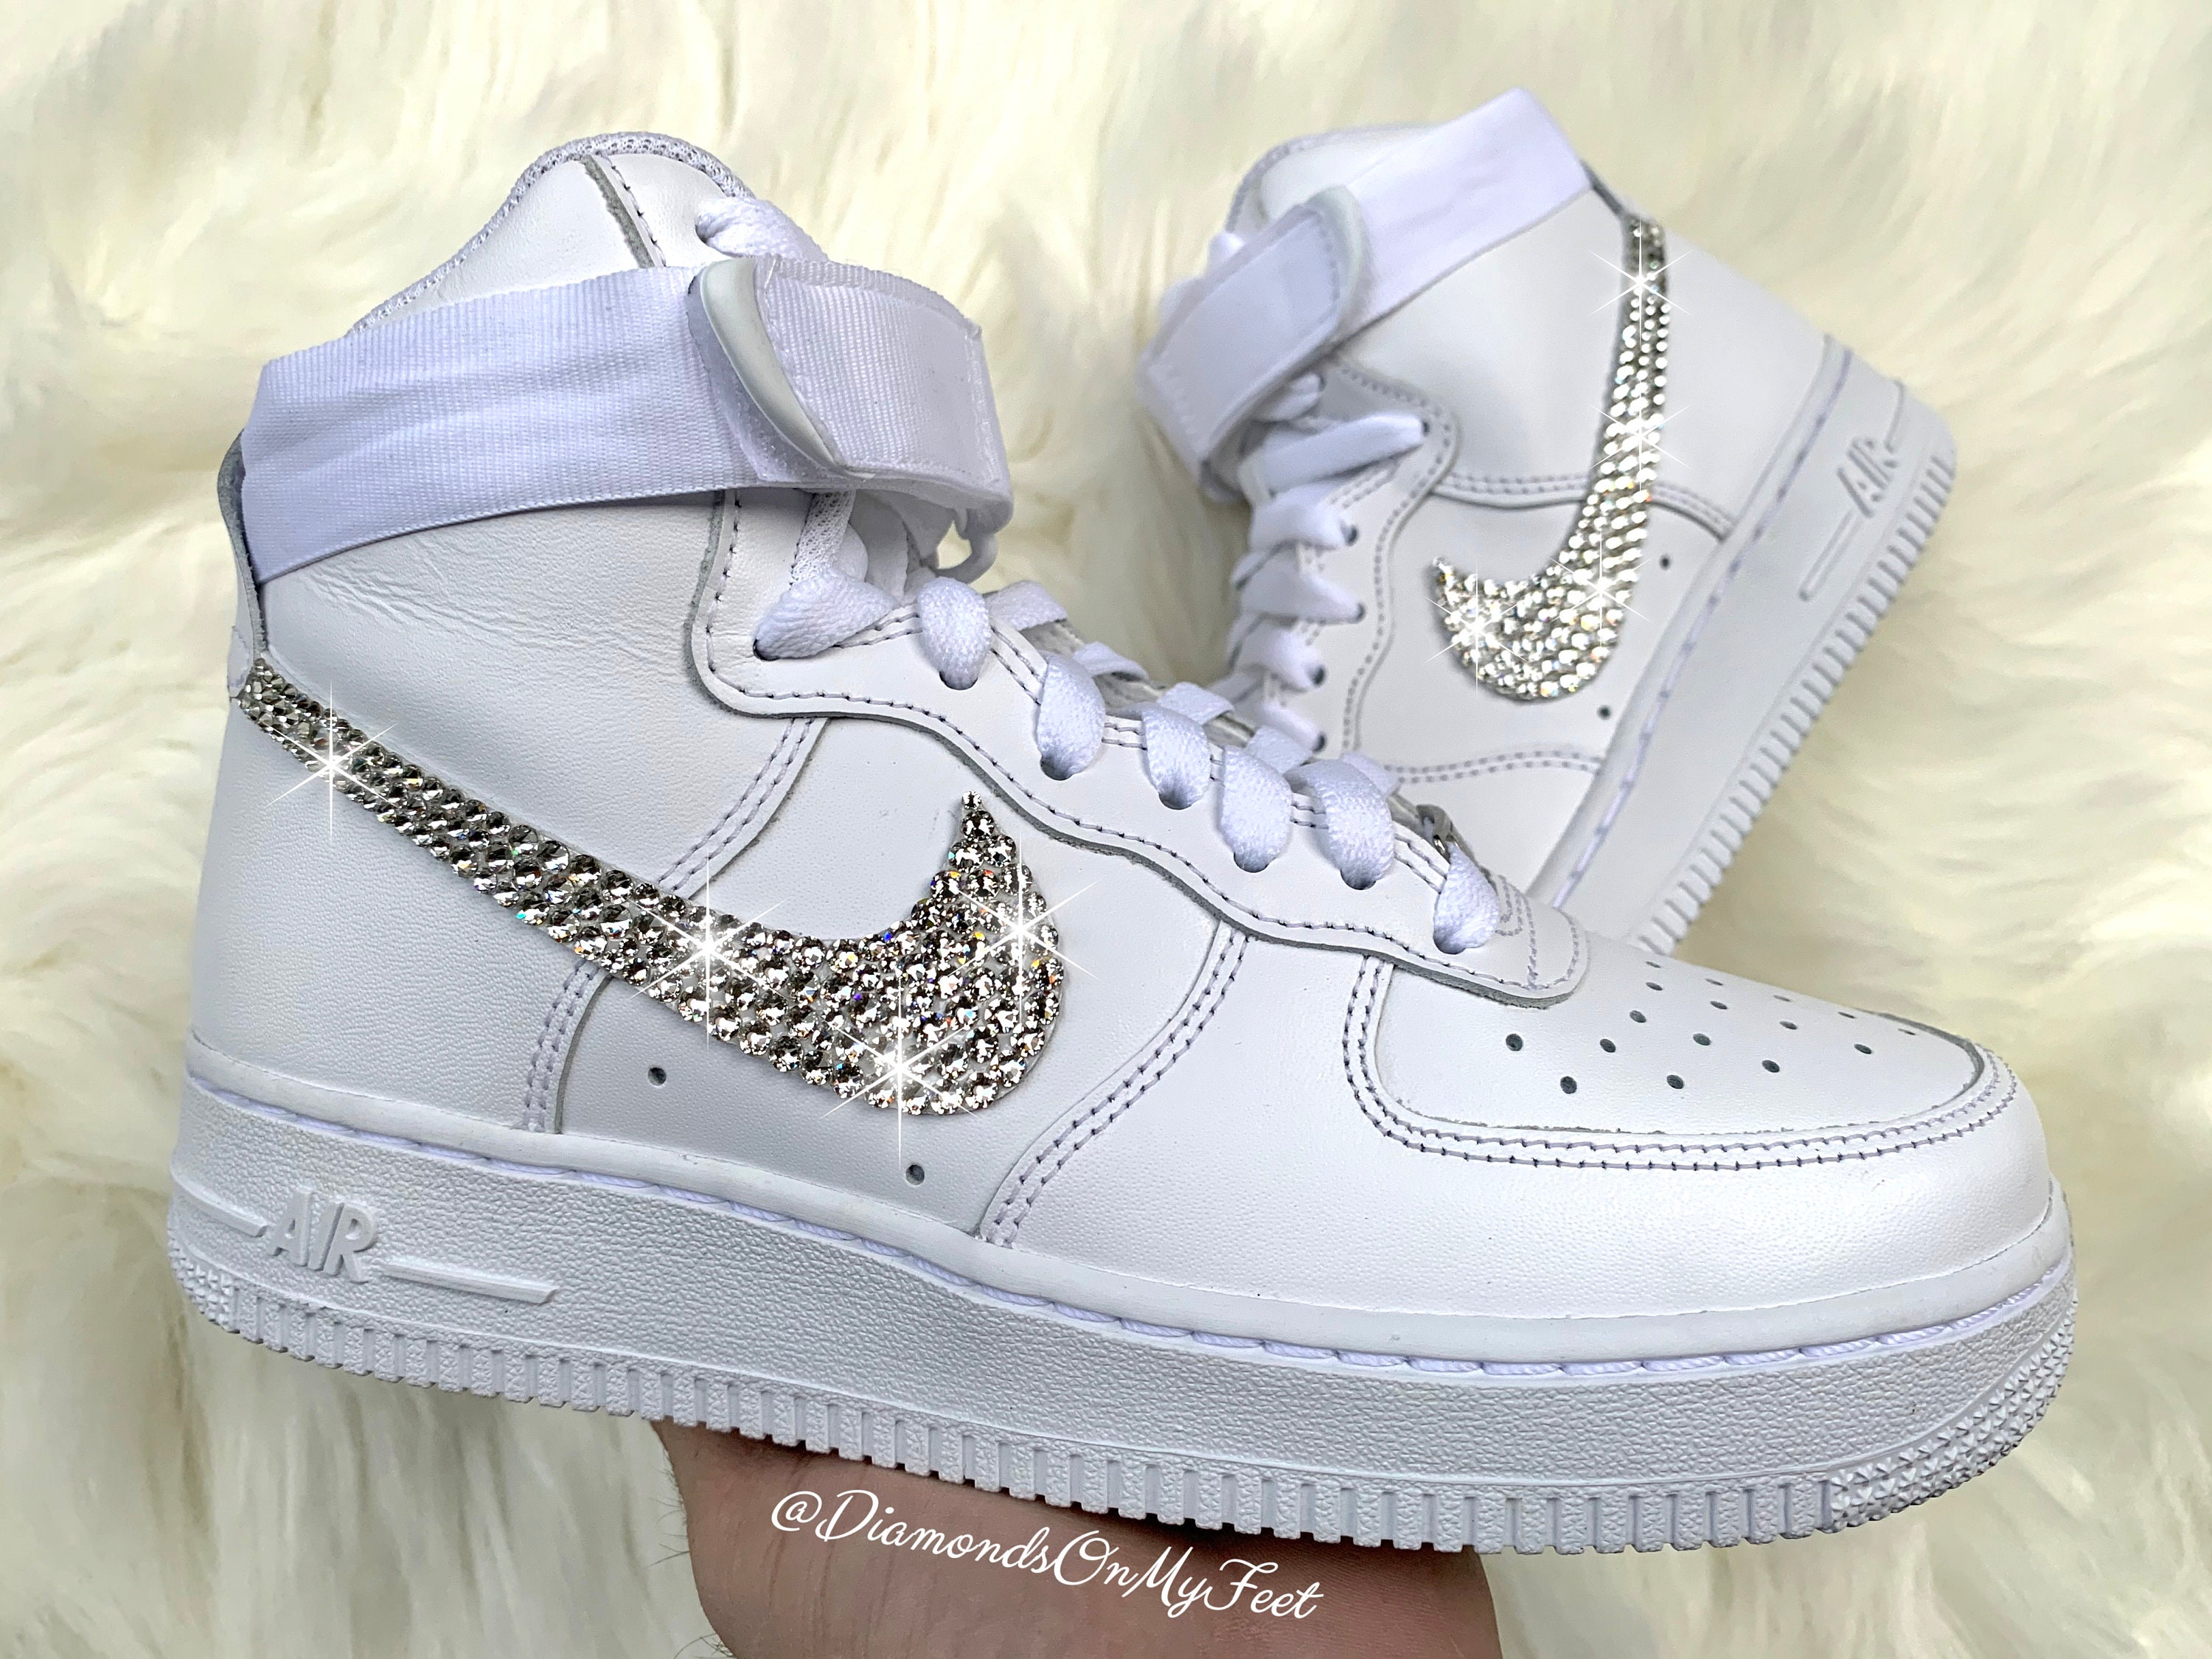 High Top Air Force Ones.